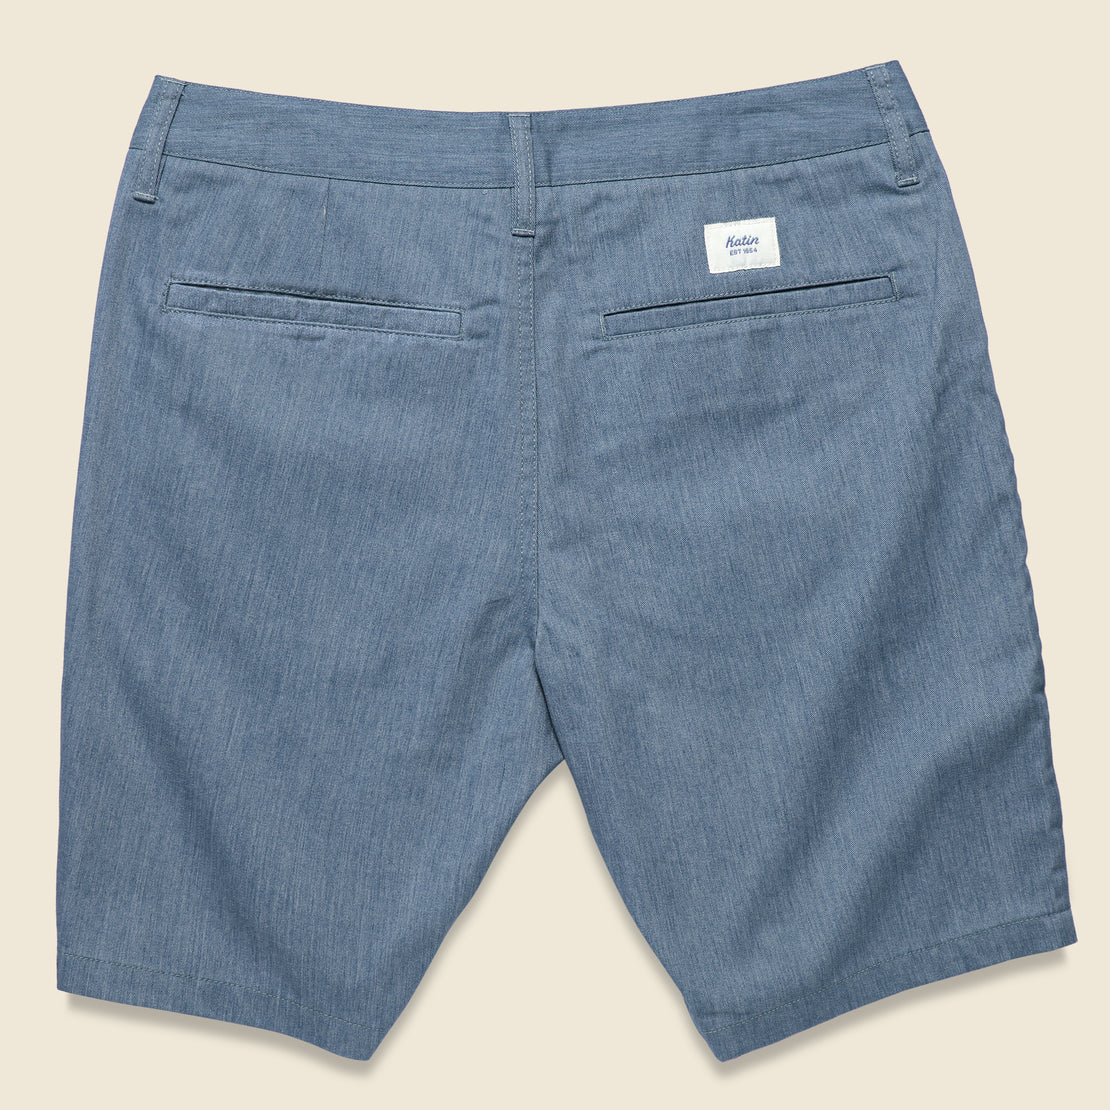 Court Short - Washed Blue - Katin - STAG Provisions - Shorts - Solid